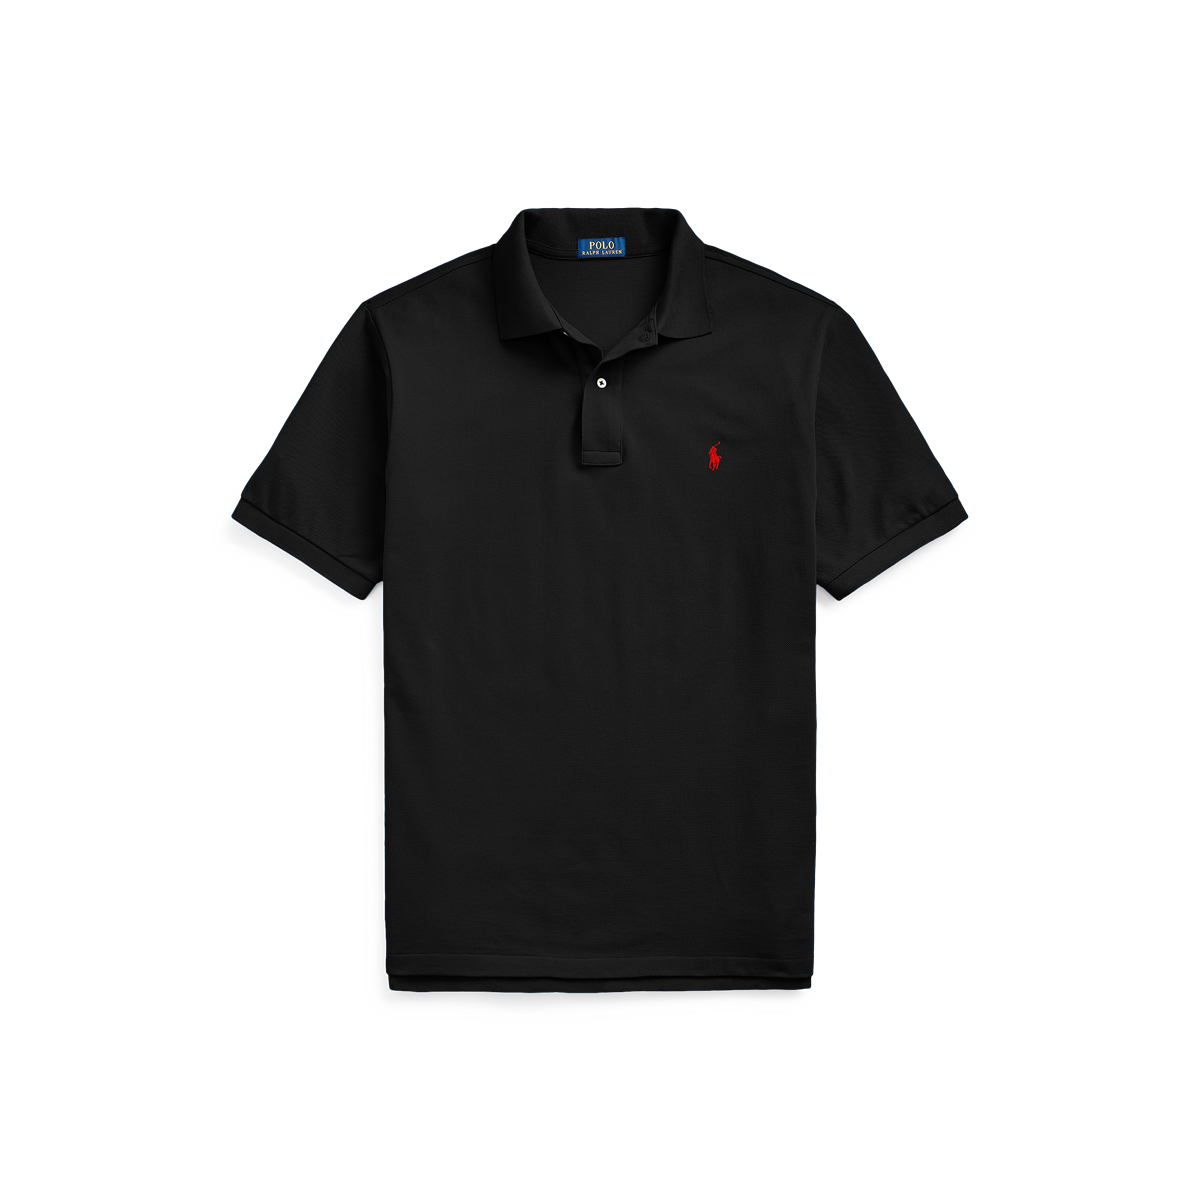 Polo Ralph Lauren Solid Mesh Polo Classic Fit Black 3X